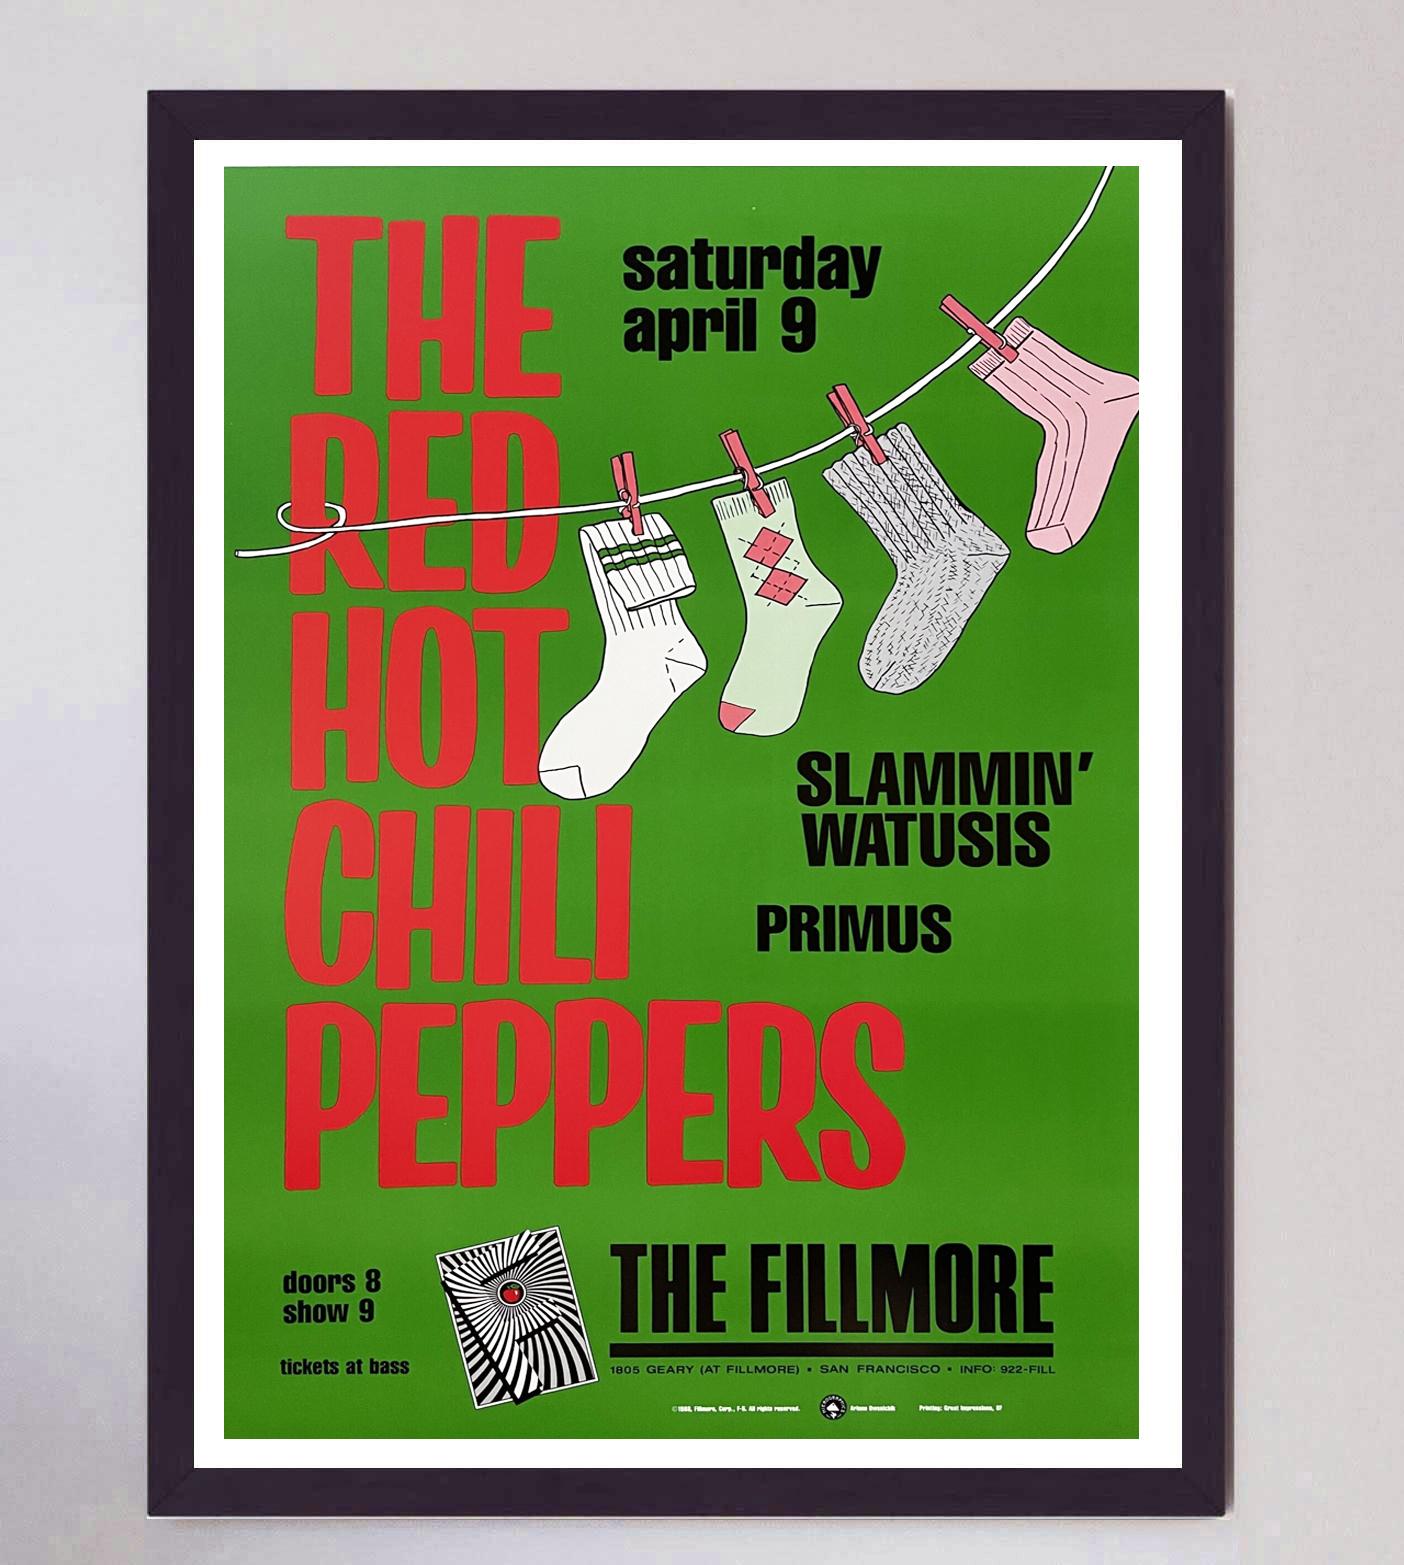 Designed by concert poster artist Arlene Owseichik, this beautiful poster was created in 1988 to promote a live concert of The Red Hot Chili Peppers at the world famous Fillmore in San Francisco. Events such as this were well known for their now